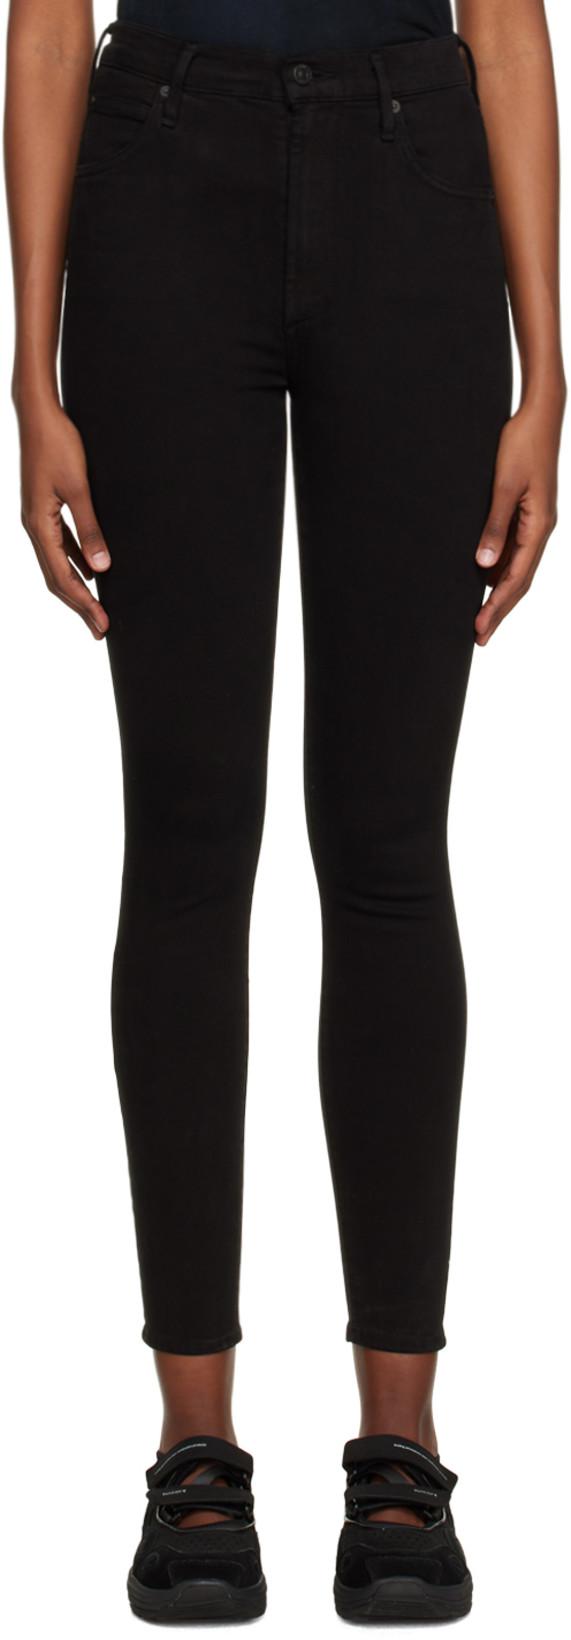 Black Chrissy High-Rise Skinny Jeans by CITIZENS OF HUMANITY